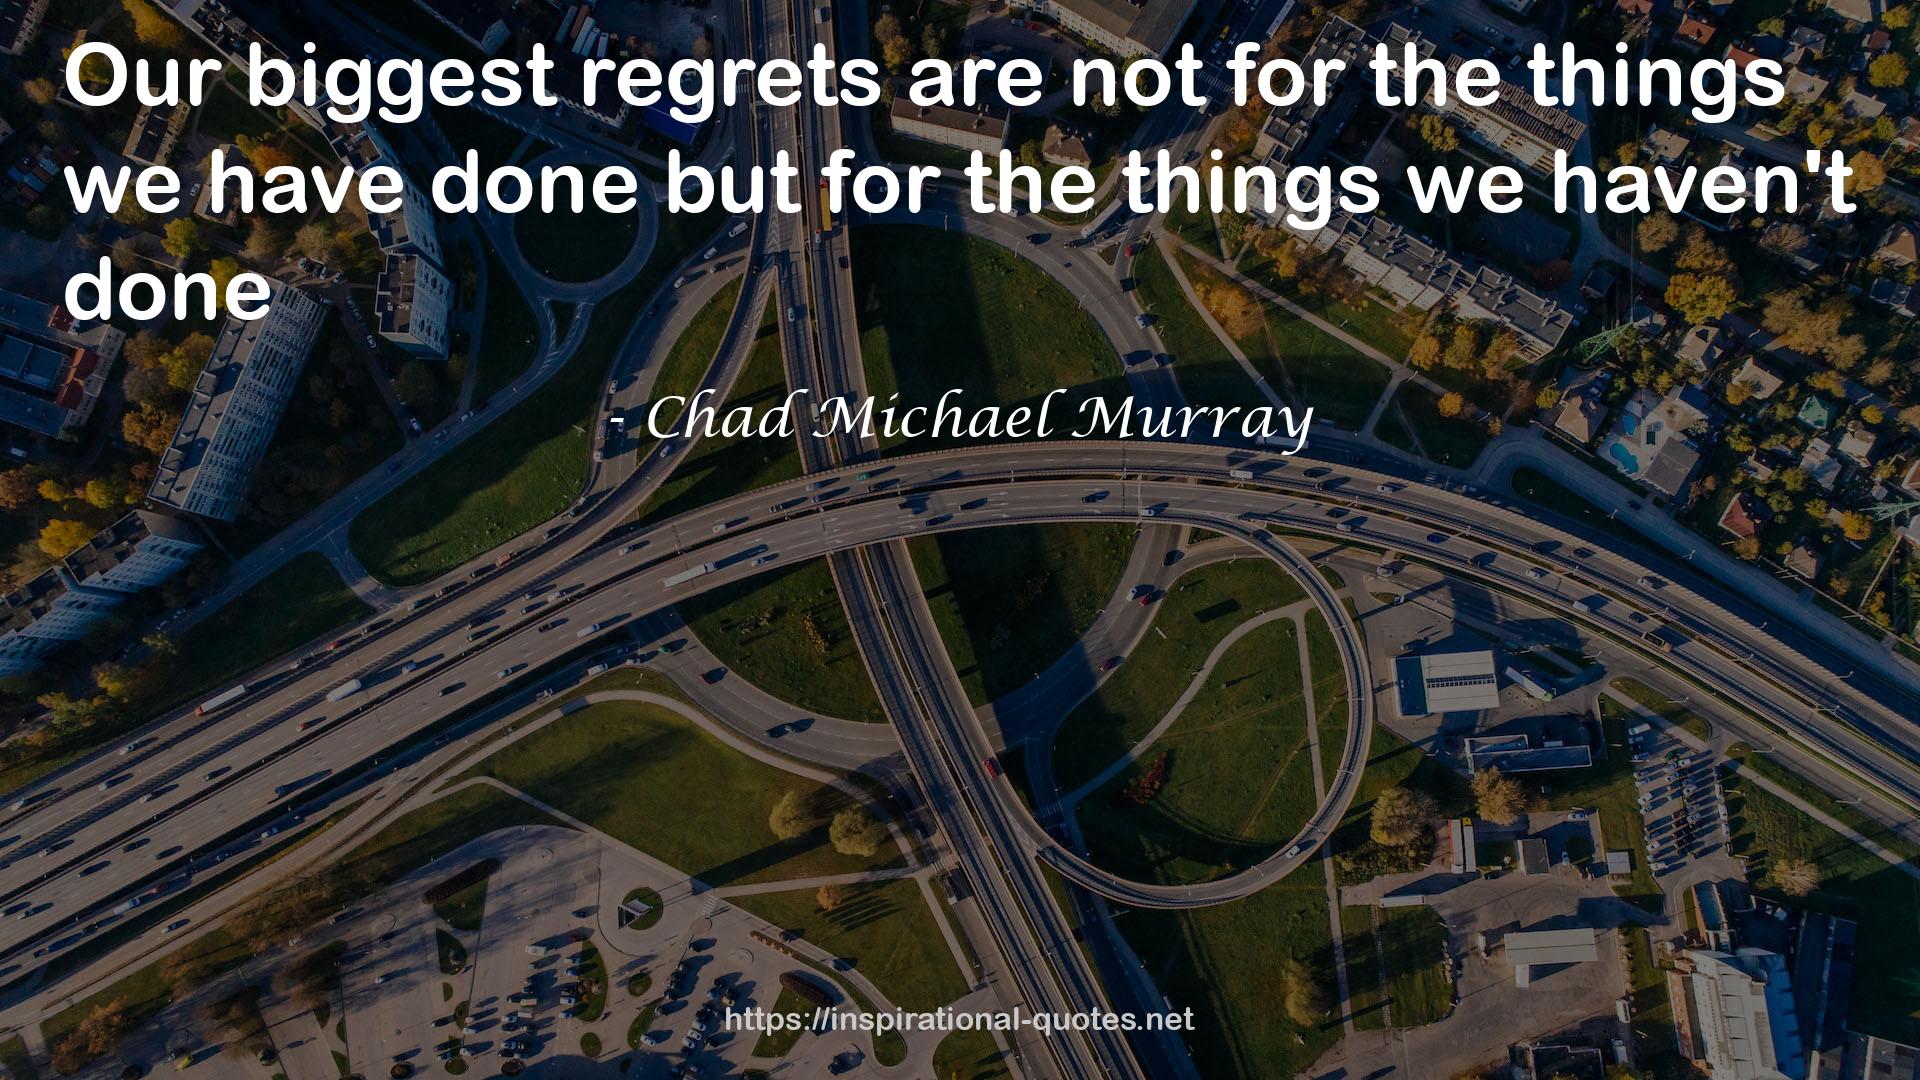 Chad Michael Murray QUOTES